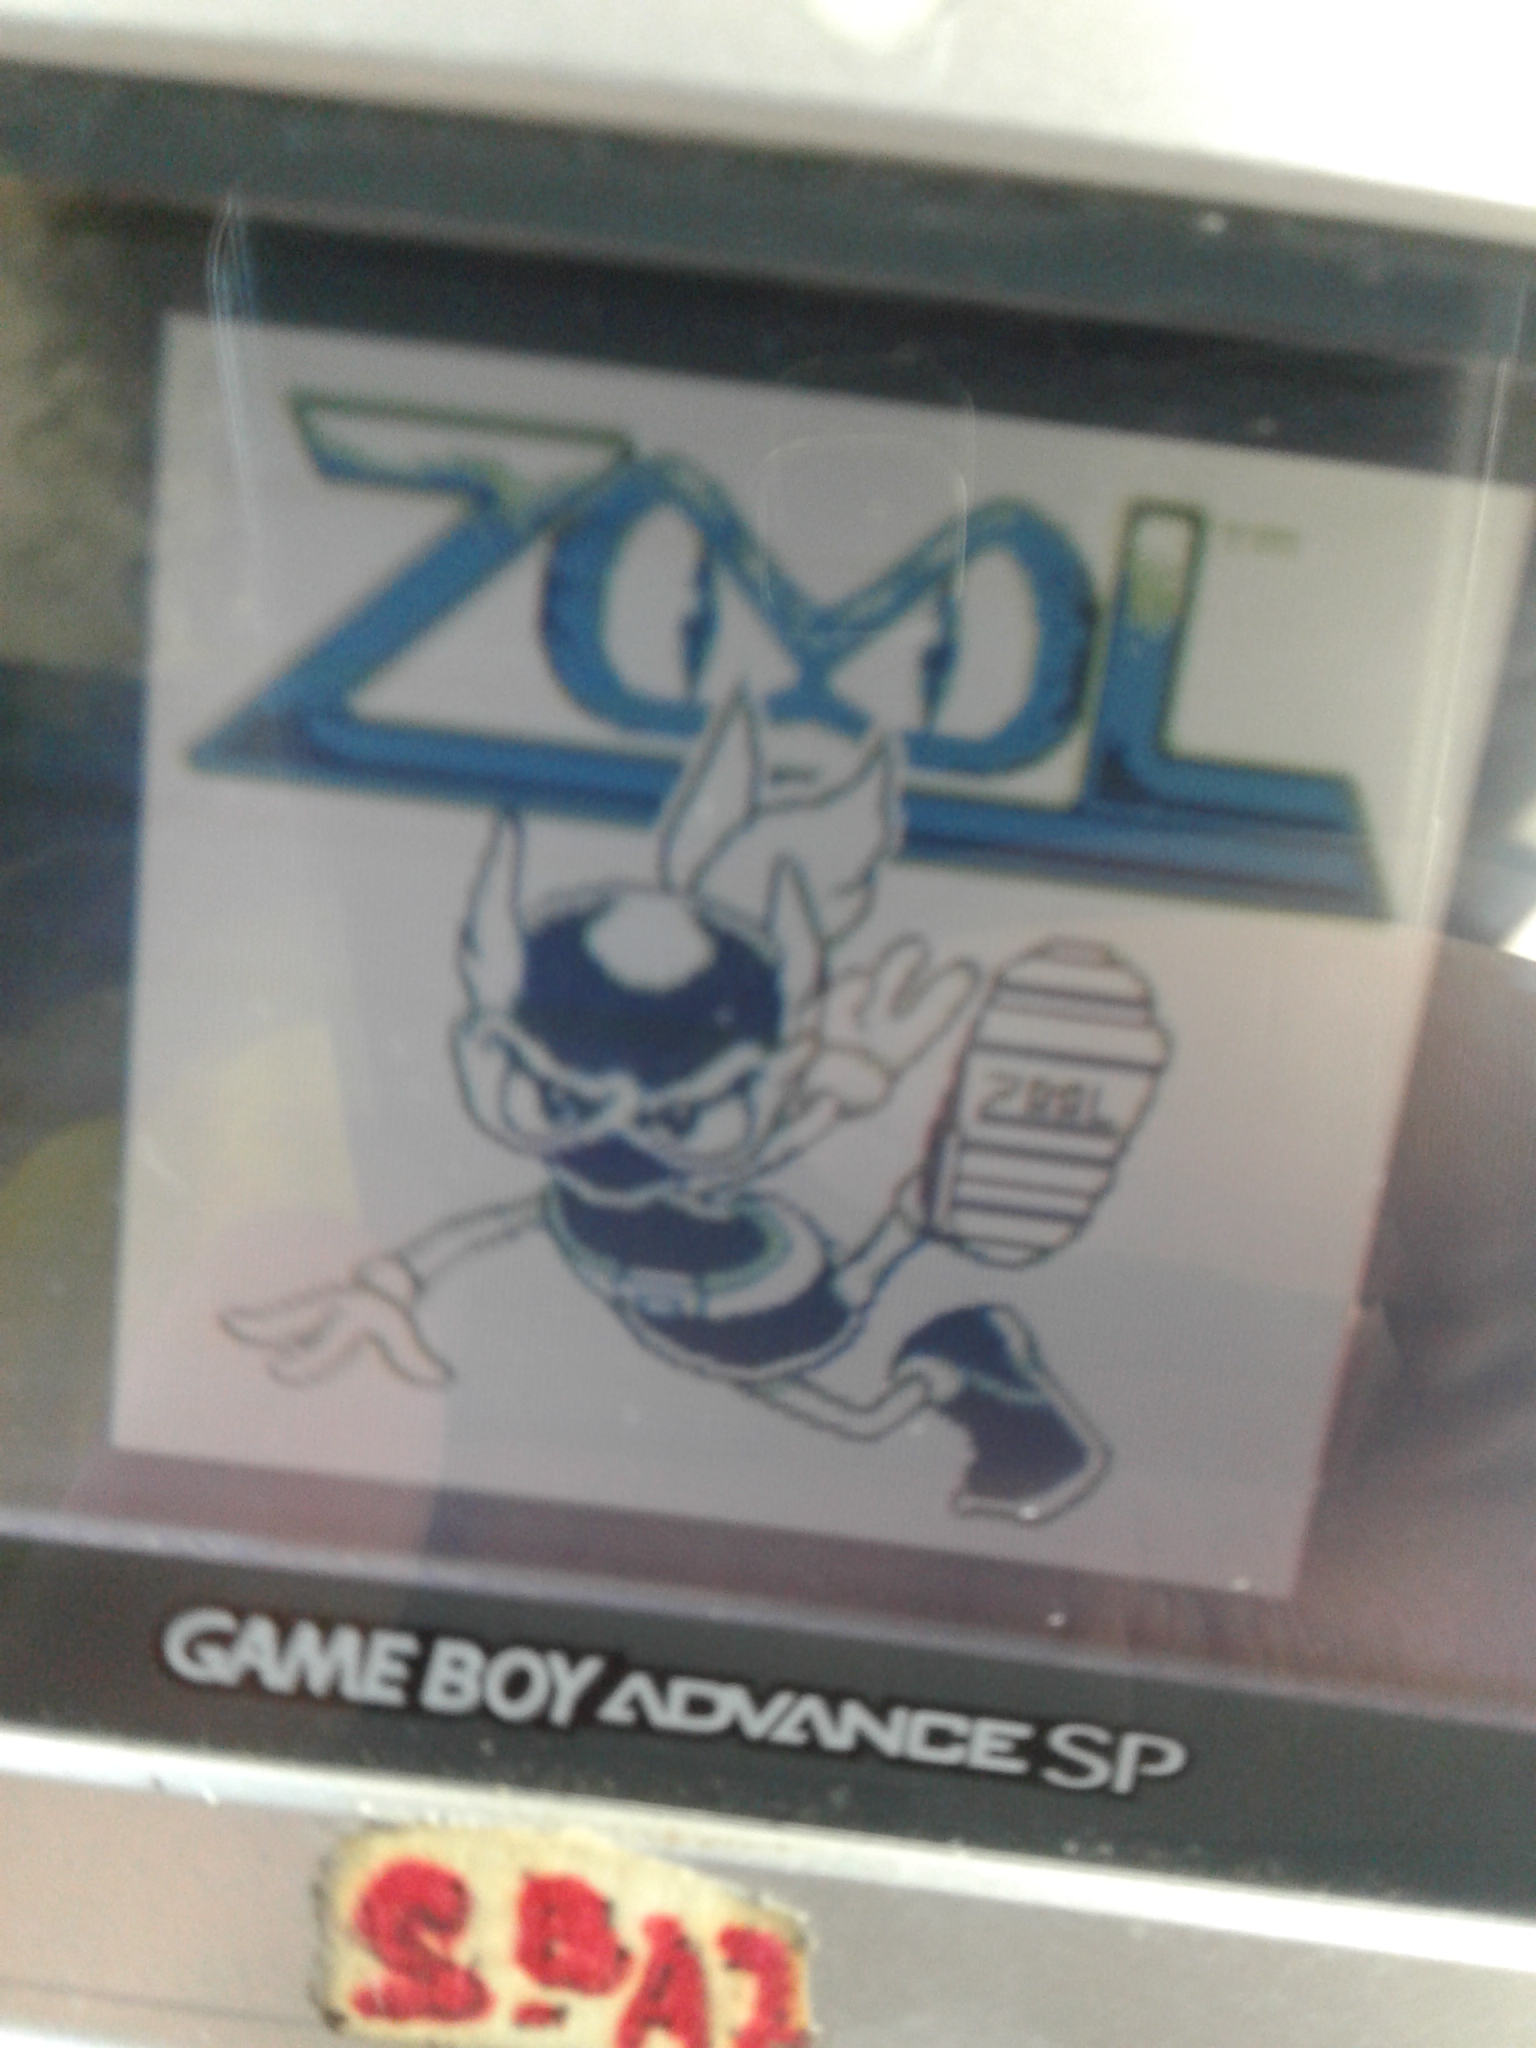 S.BAZ: Zool (Game Boy) 36,550 points on 2019-11-18 07:11:10